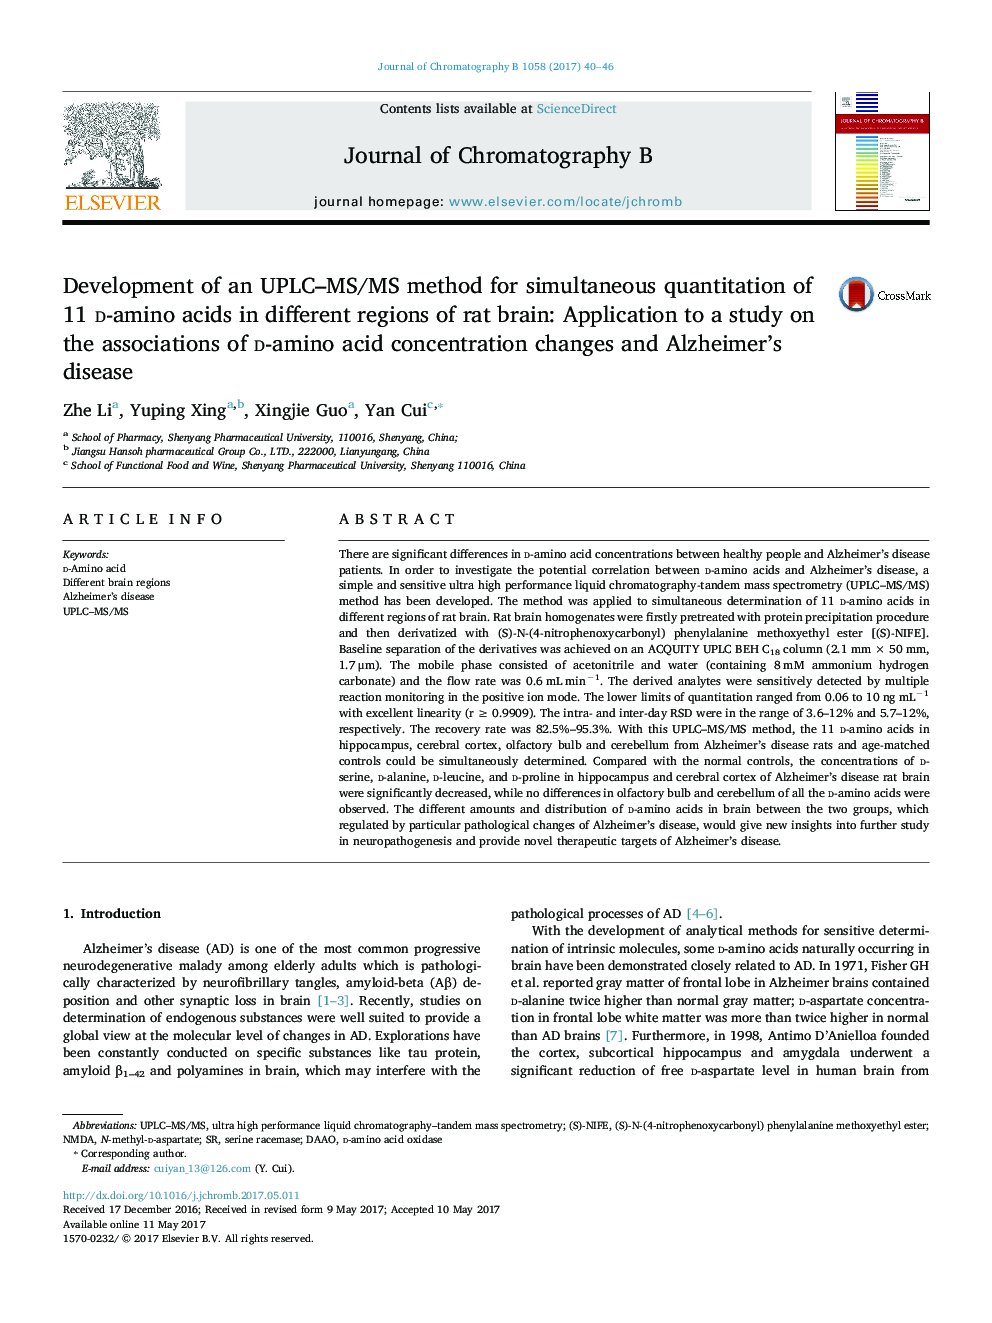 Development of an UPLC-MS/MS method for simultaneous quantitation of 11 d-amino acids in different regions of rat brain: Application to a study on the associations of d-amino acid concentration changes and Alzheimer's disease